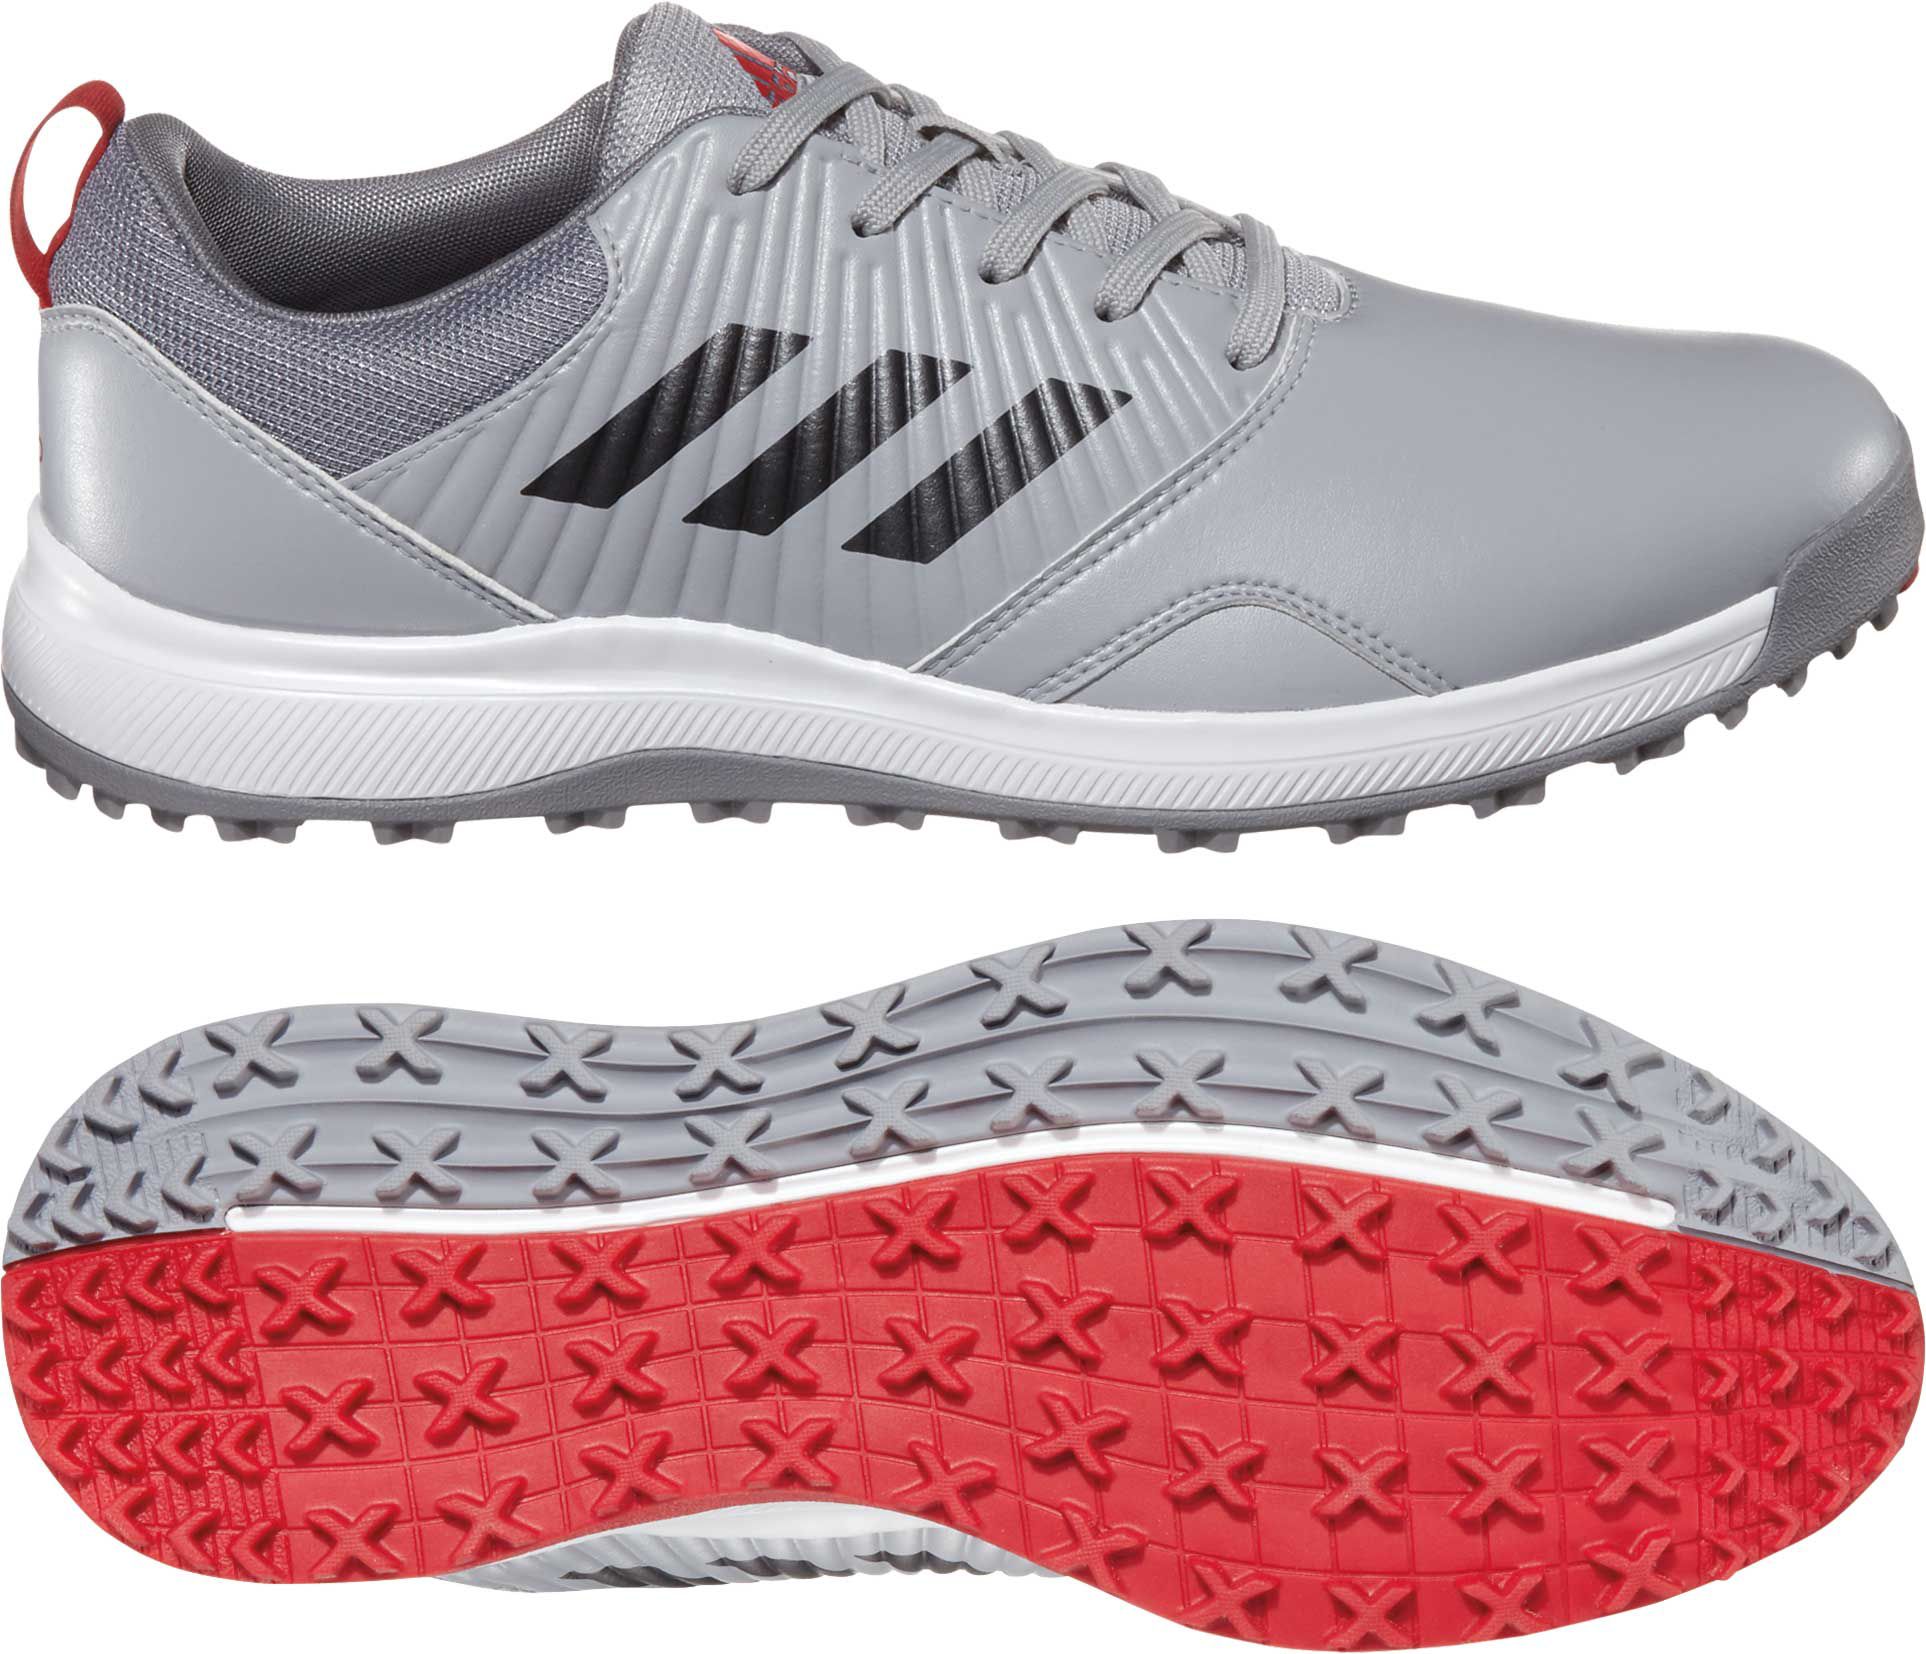 adidas cp traxion sl golf shoes review